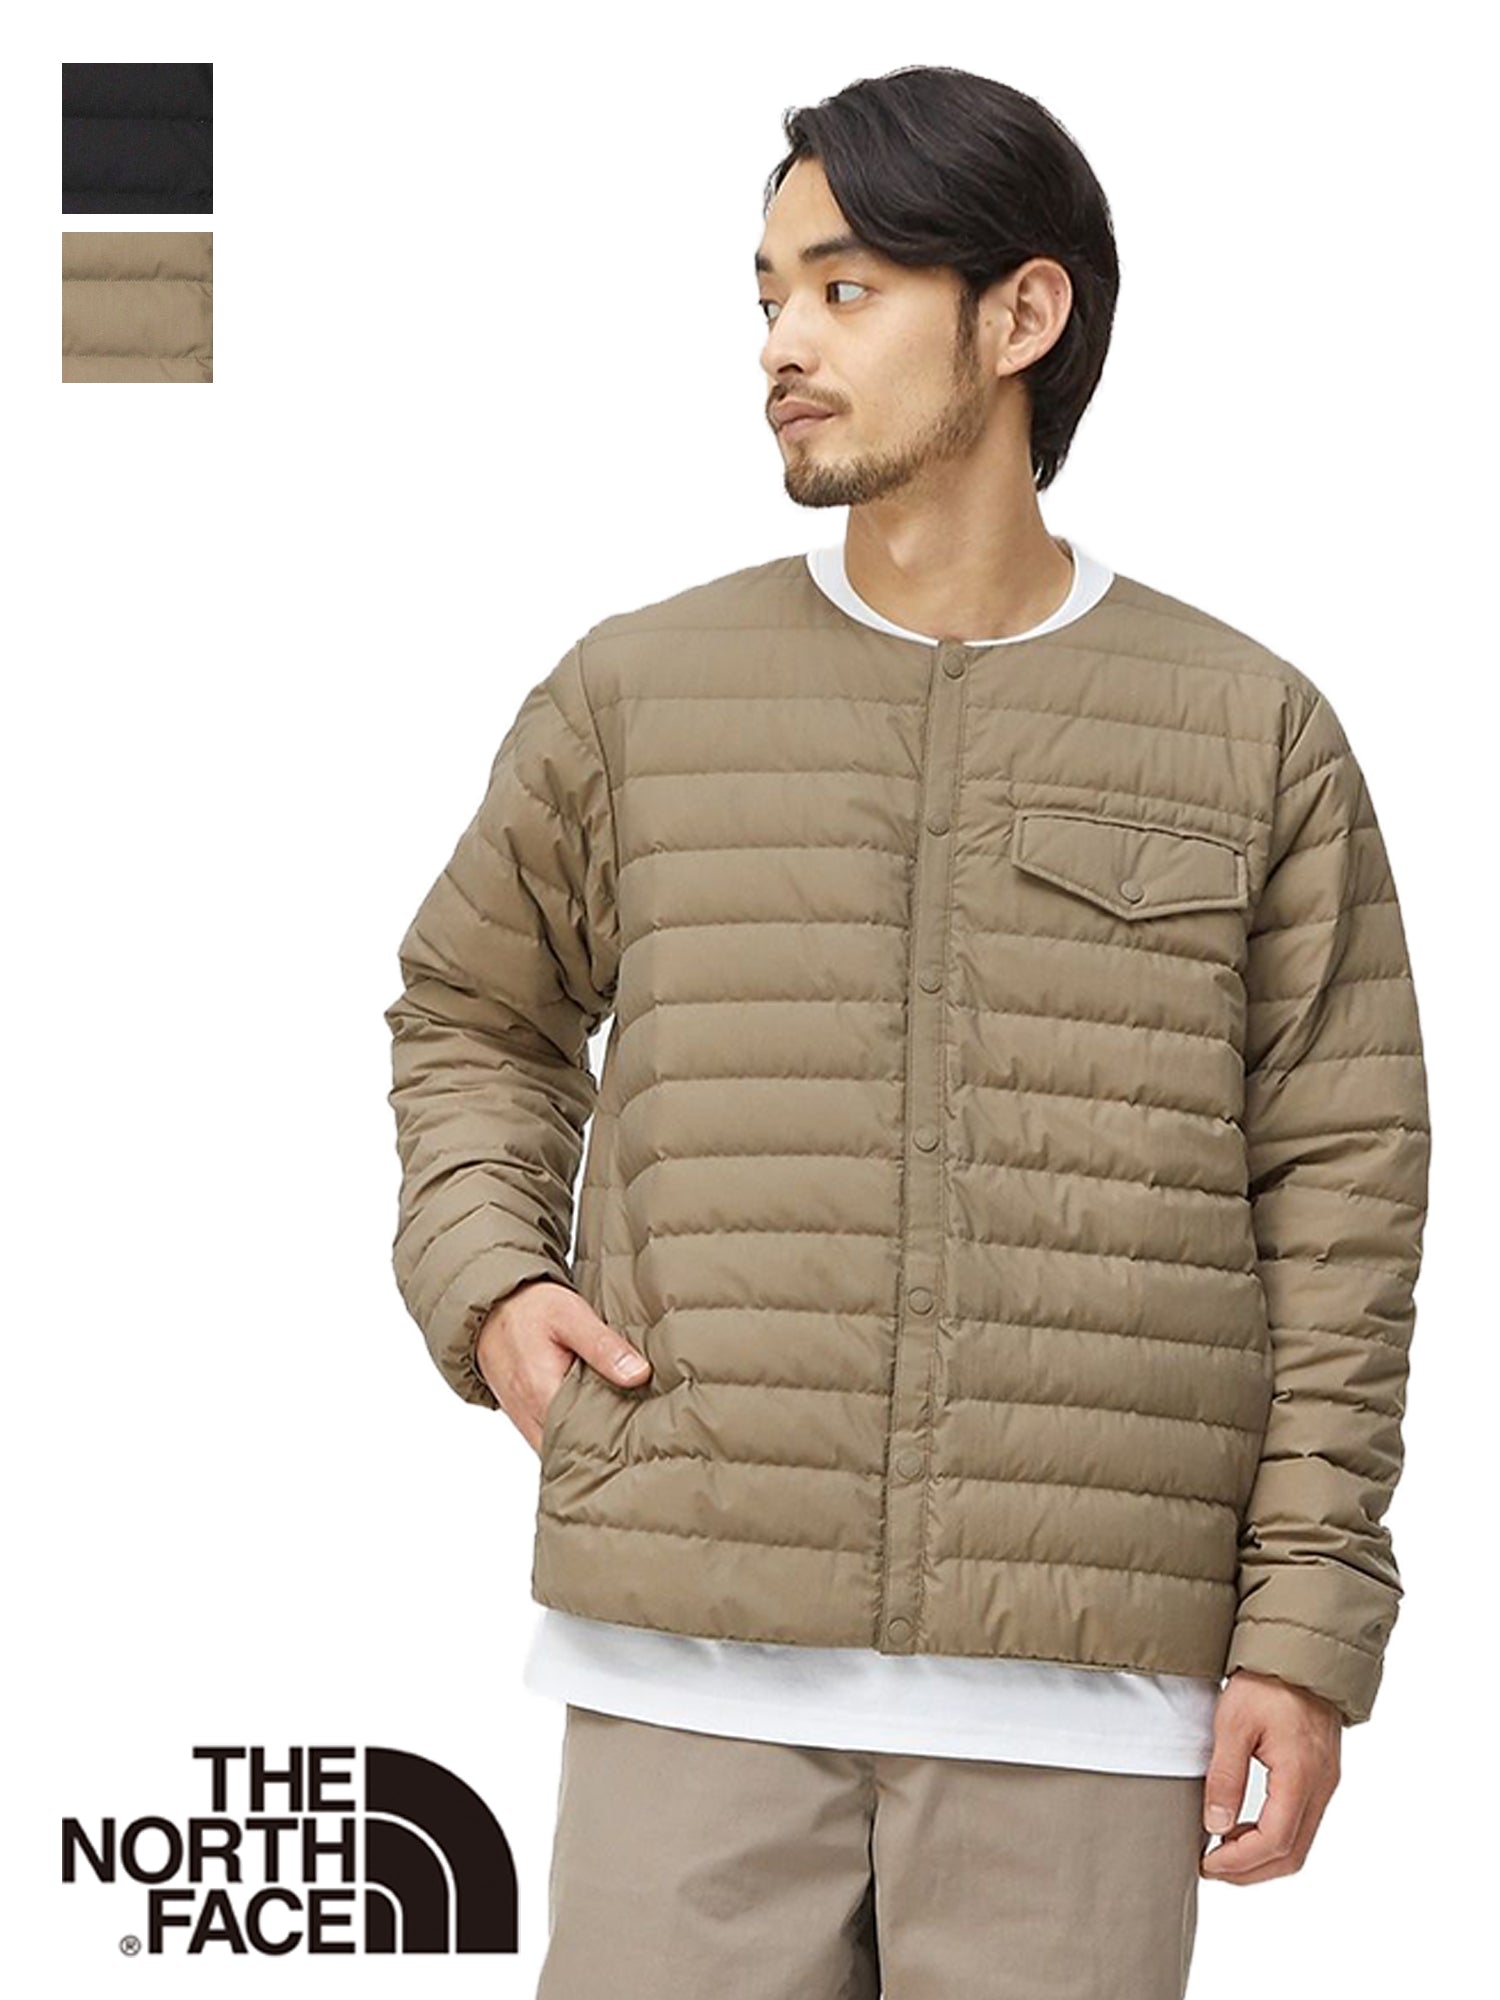 THE NORTH FACE] Windstopper Zephyr Shell Cardigan / The North Face